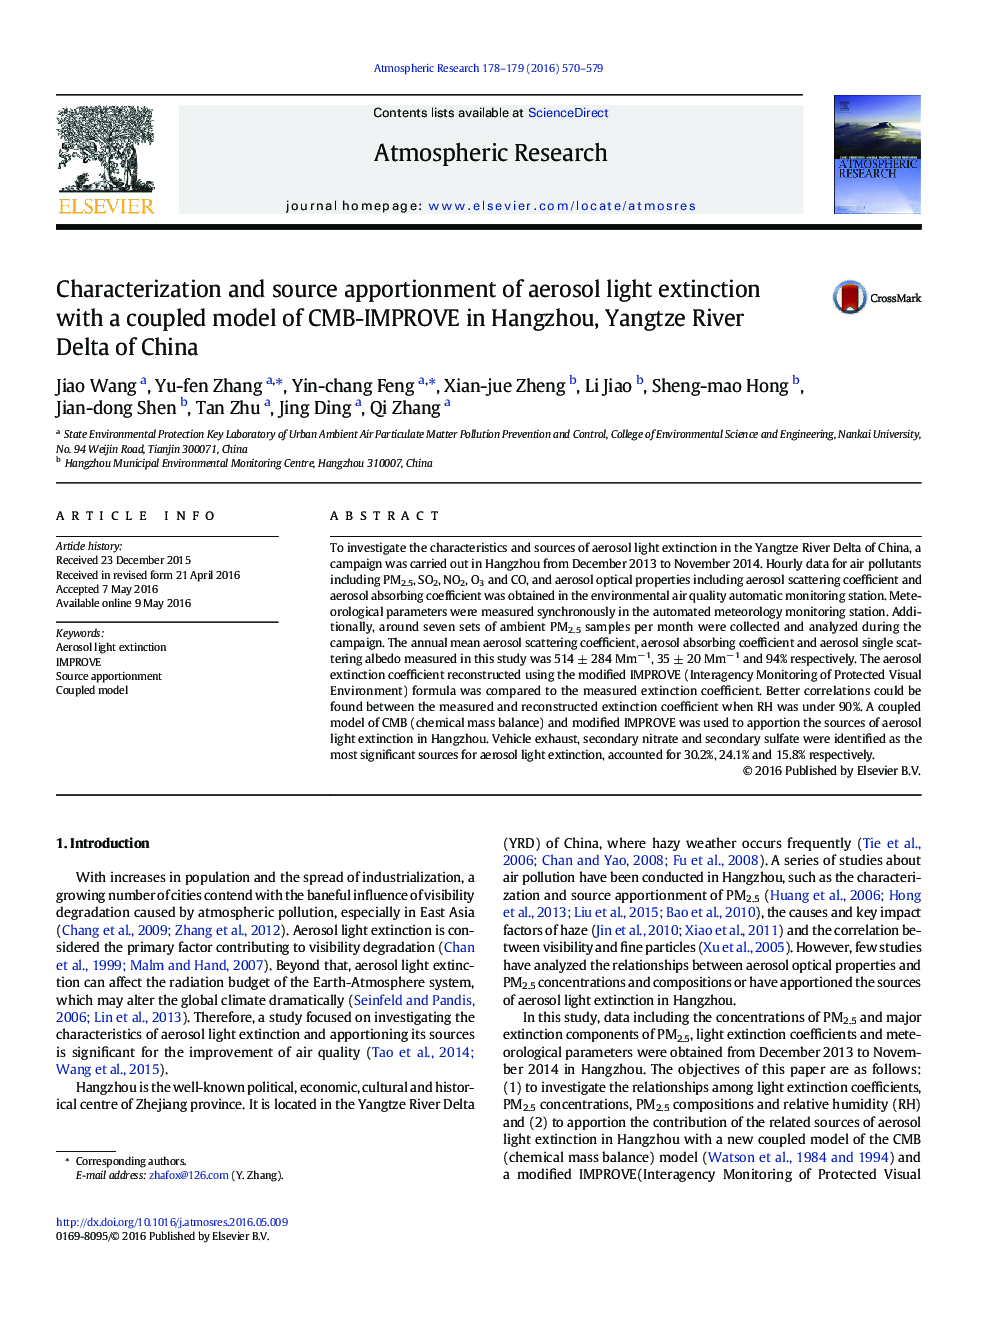 Characterization and source apportionment of aerosol light extinction with a coupled model of CMB-IMPROVE in Hangzhou, Yangtze River Delta of China